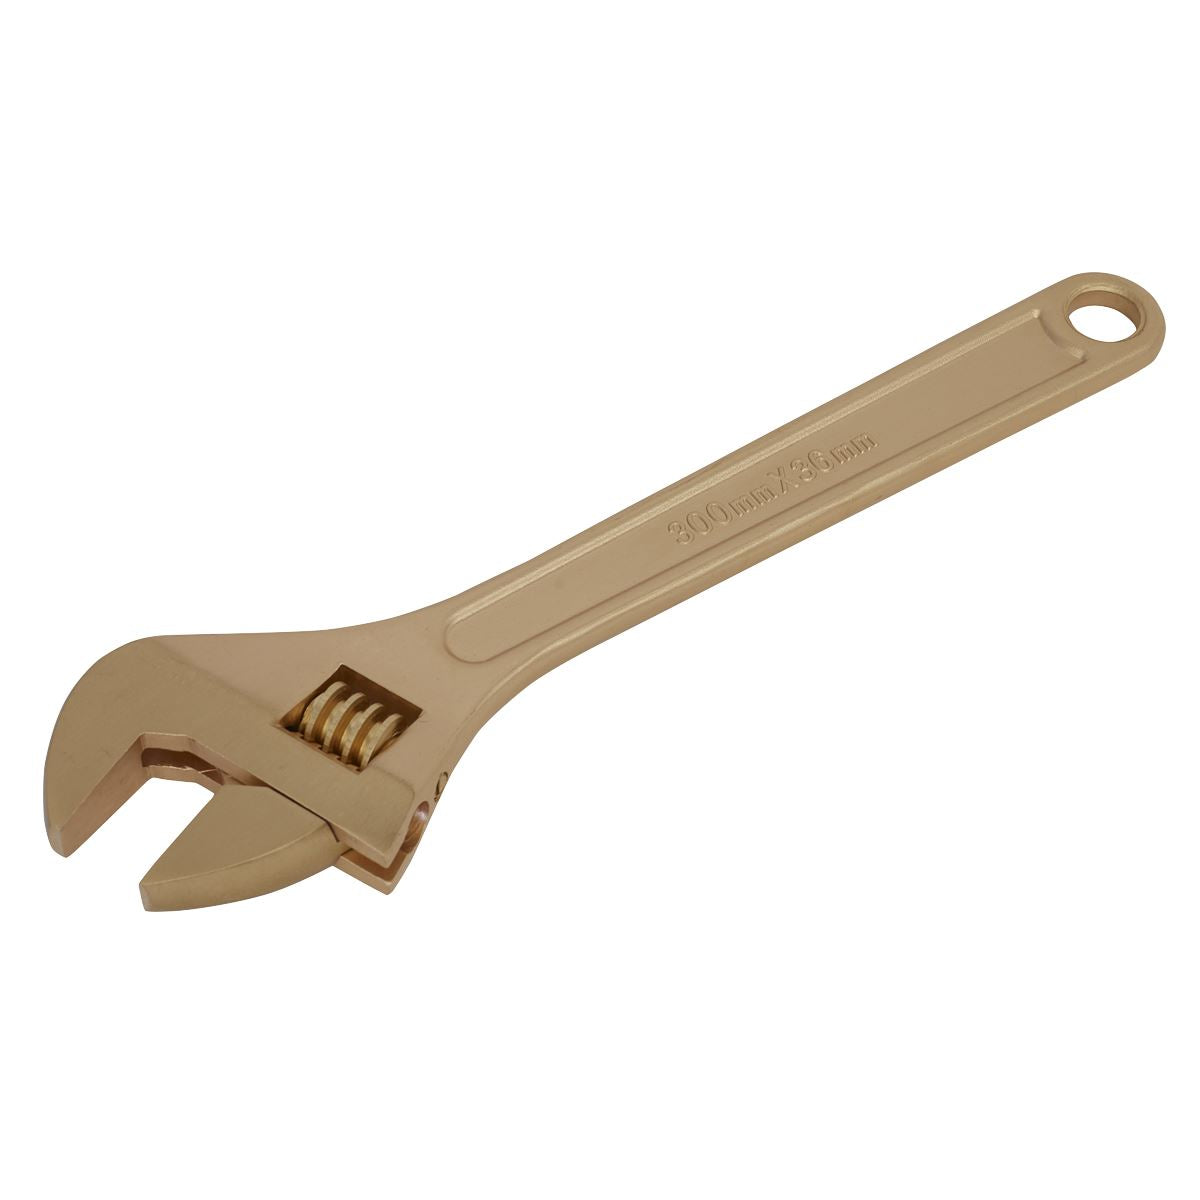 Sealey Premier Adjustable Wrench 300mm - Non-Sparking